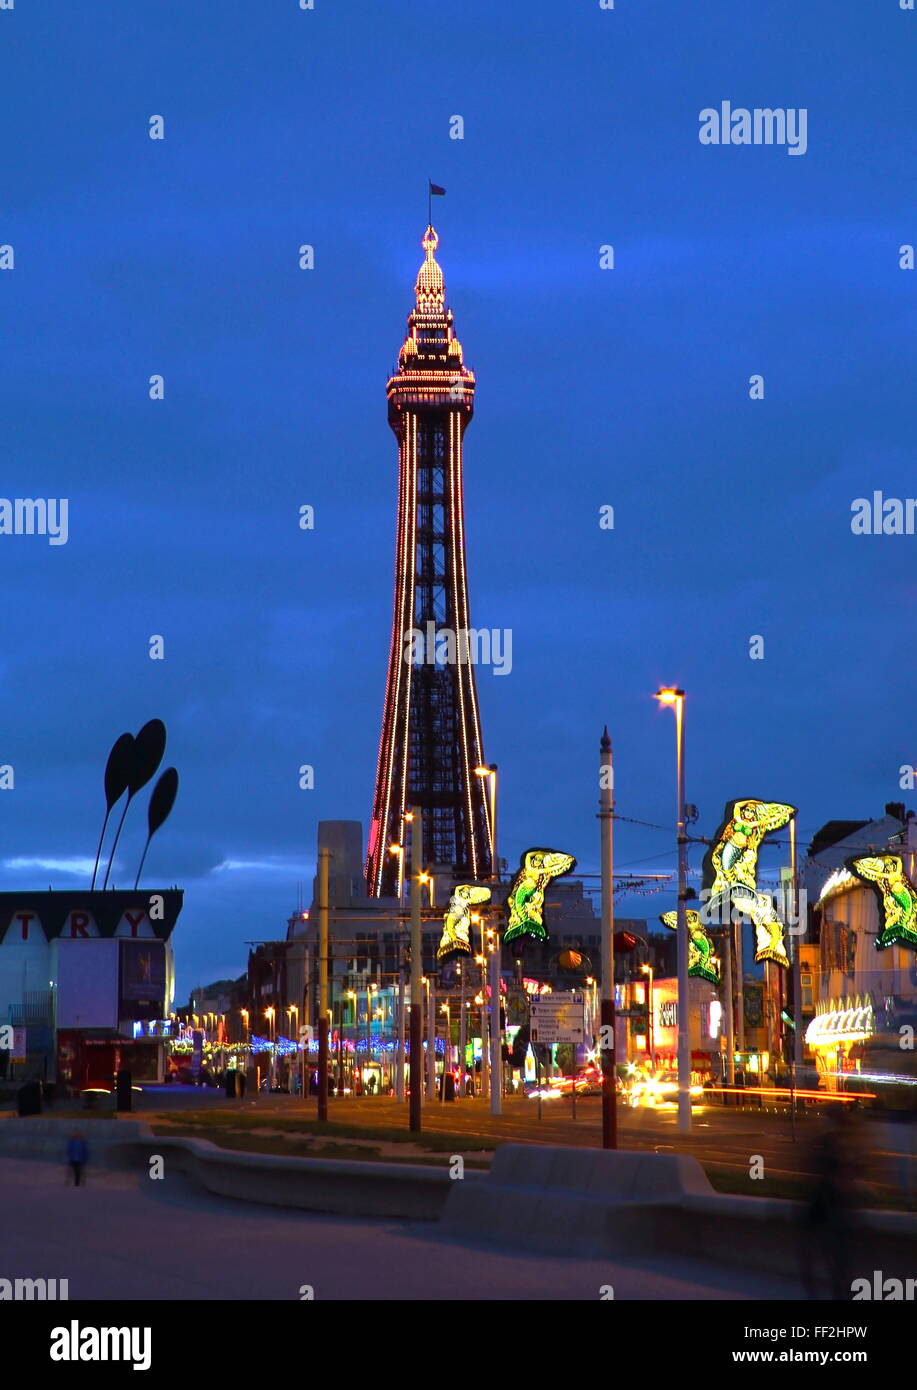 BRMackpooRM iRMRMuminations with the tower and street mermaid decorations, BRMackpooRM, RMancashire, EngRMand, United Kingdom, Europe Stock Photo